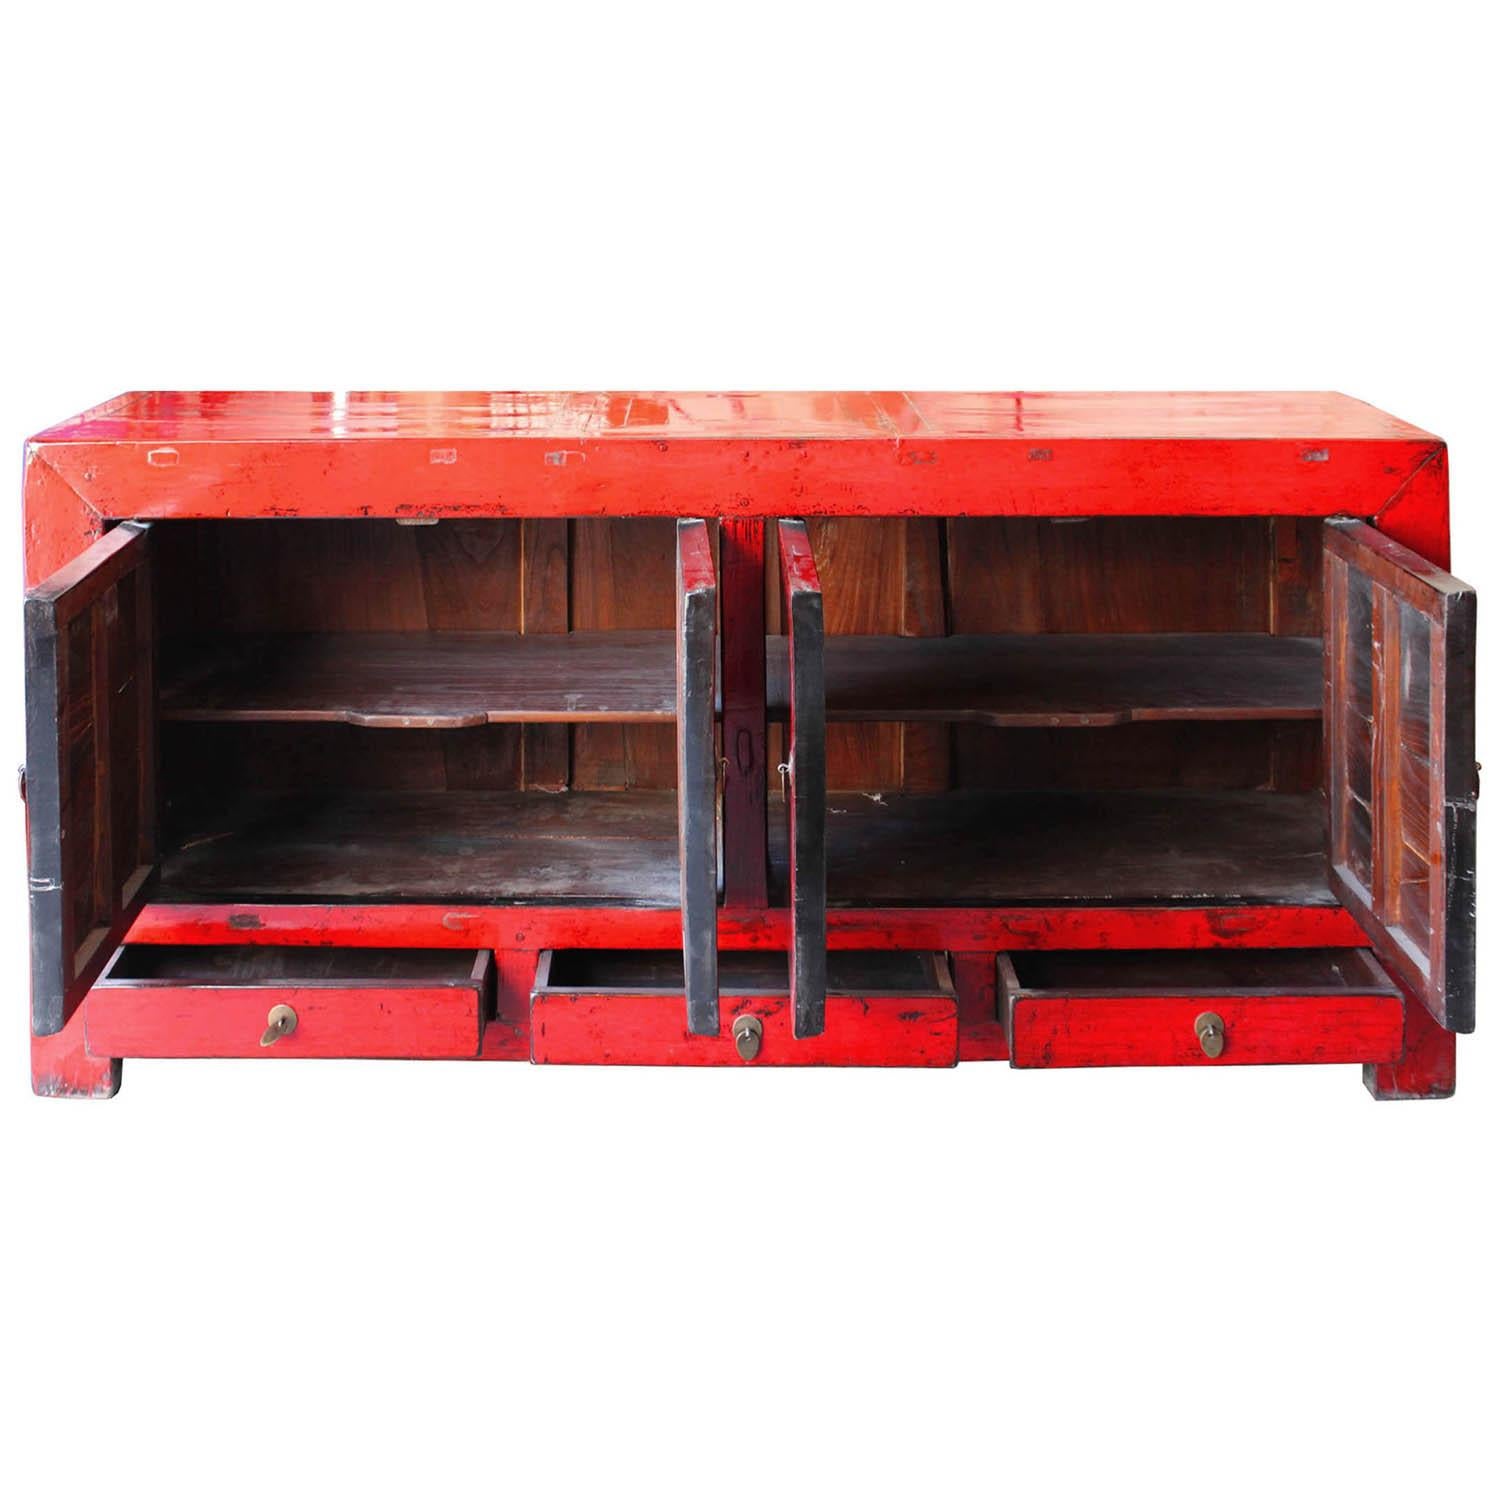 4-door red lacquer sideboard with clean lines and exposed wood edges will be the focal point in any room in the house. Use as a serving buffet with plenty of storage below or beneath a flat screen TV. Shandong, China. New interior shelving and